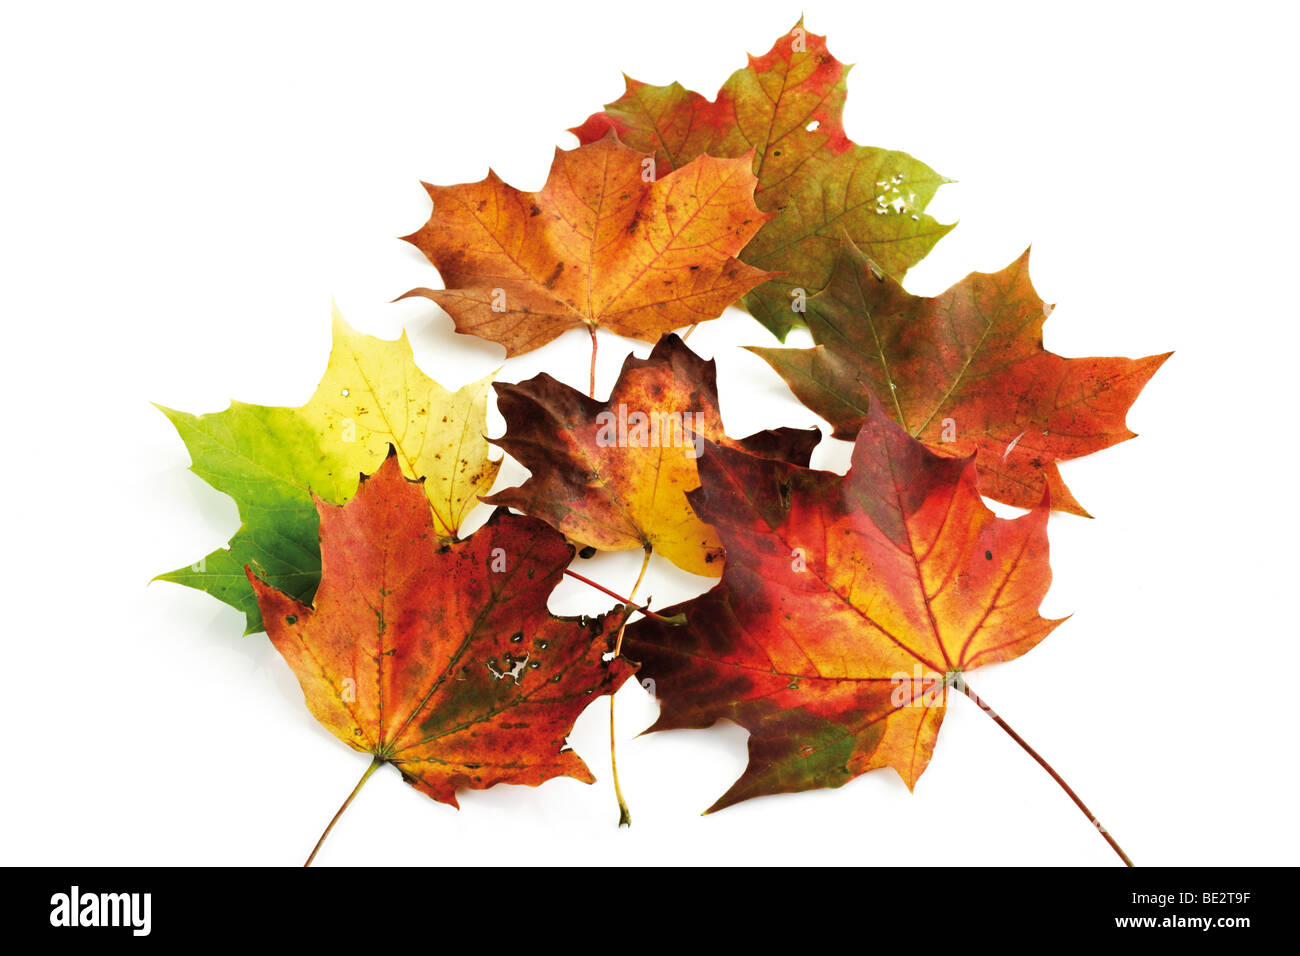 Autumn-colored maple leaves Stock Photo